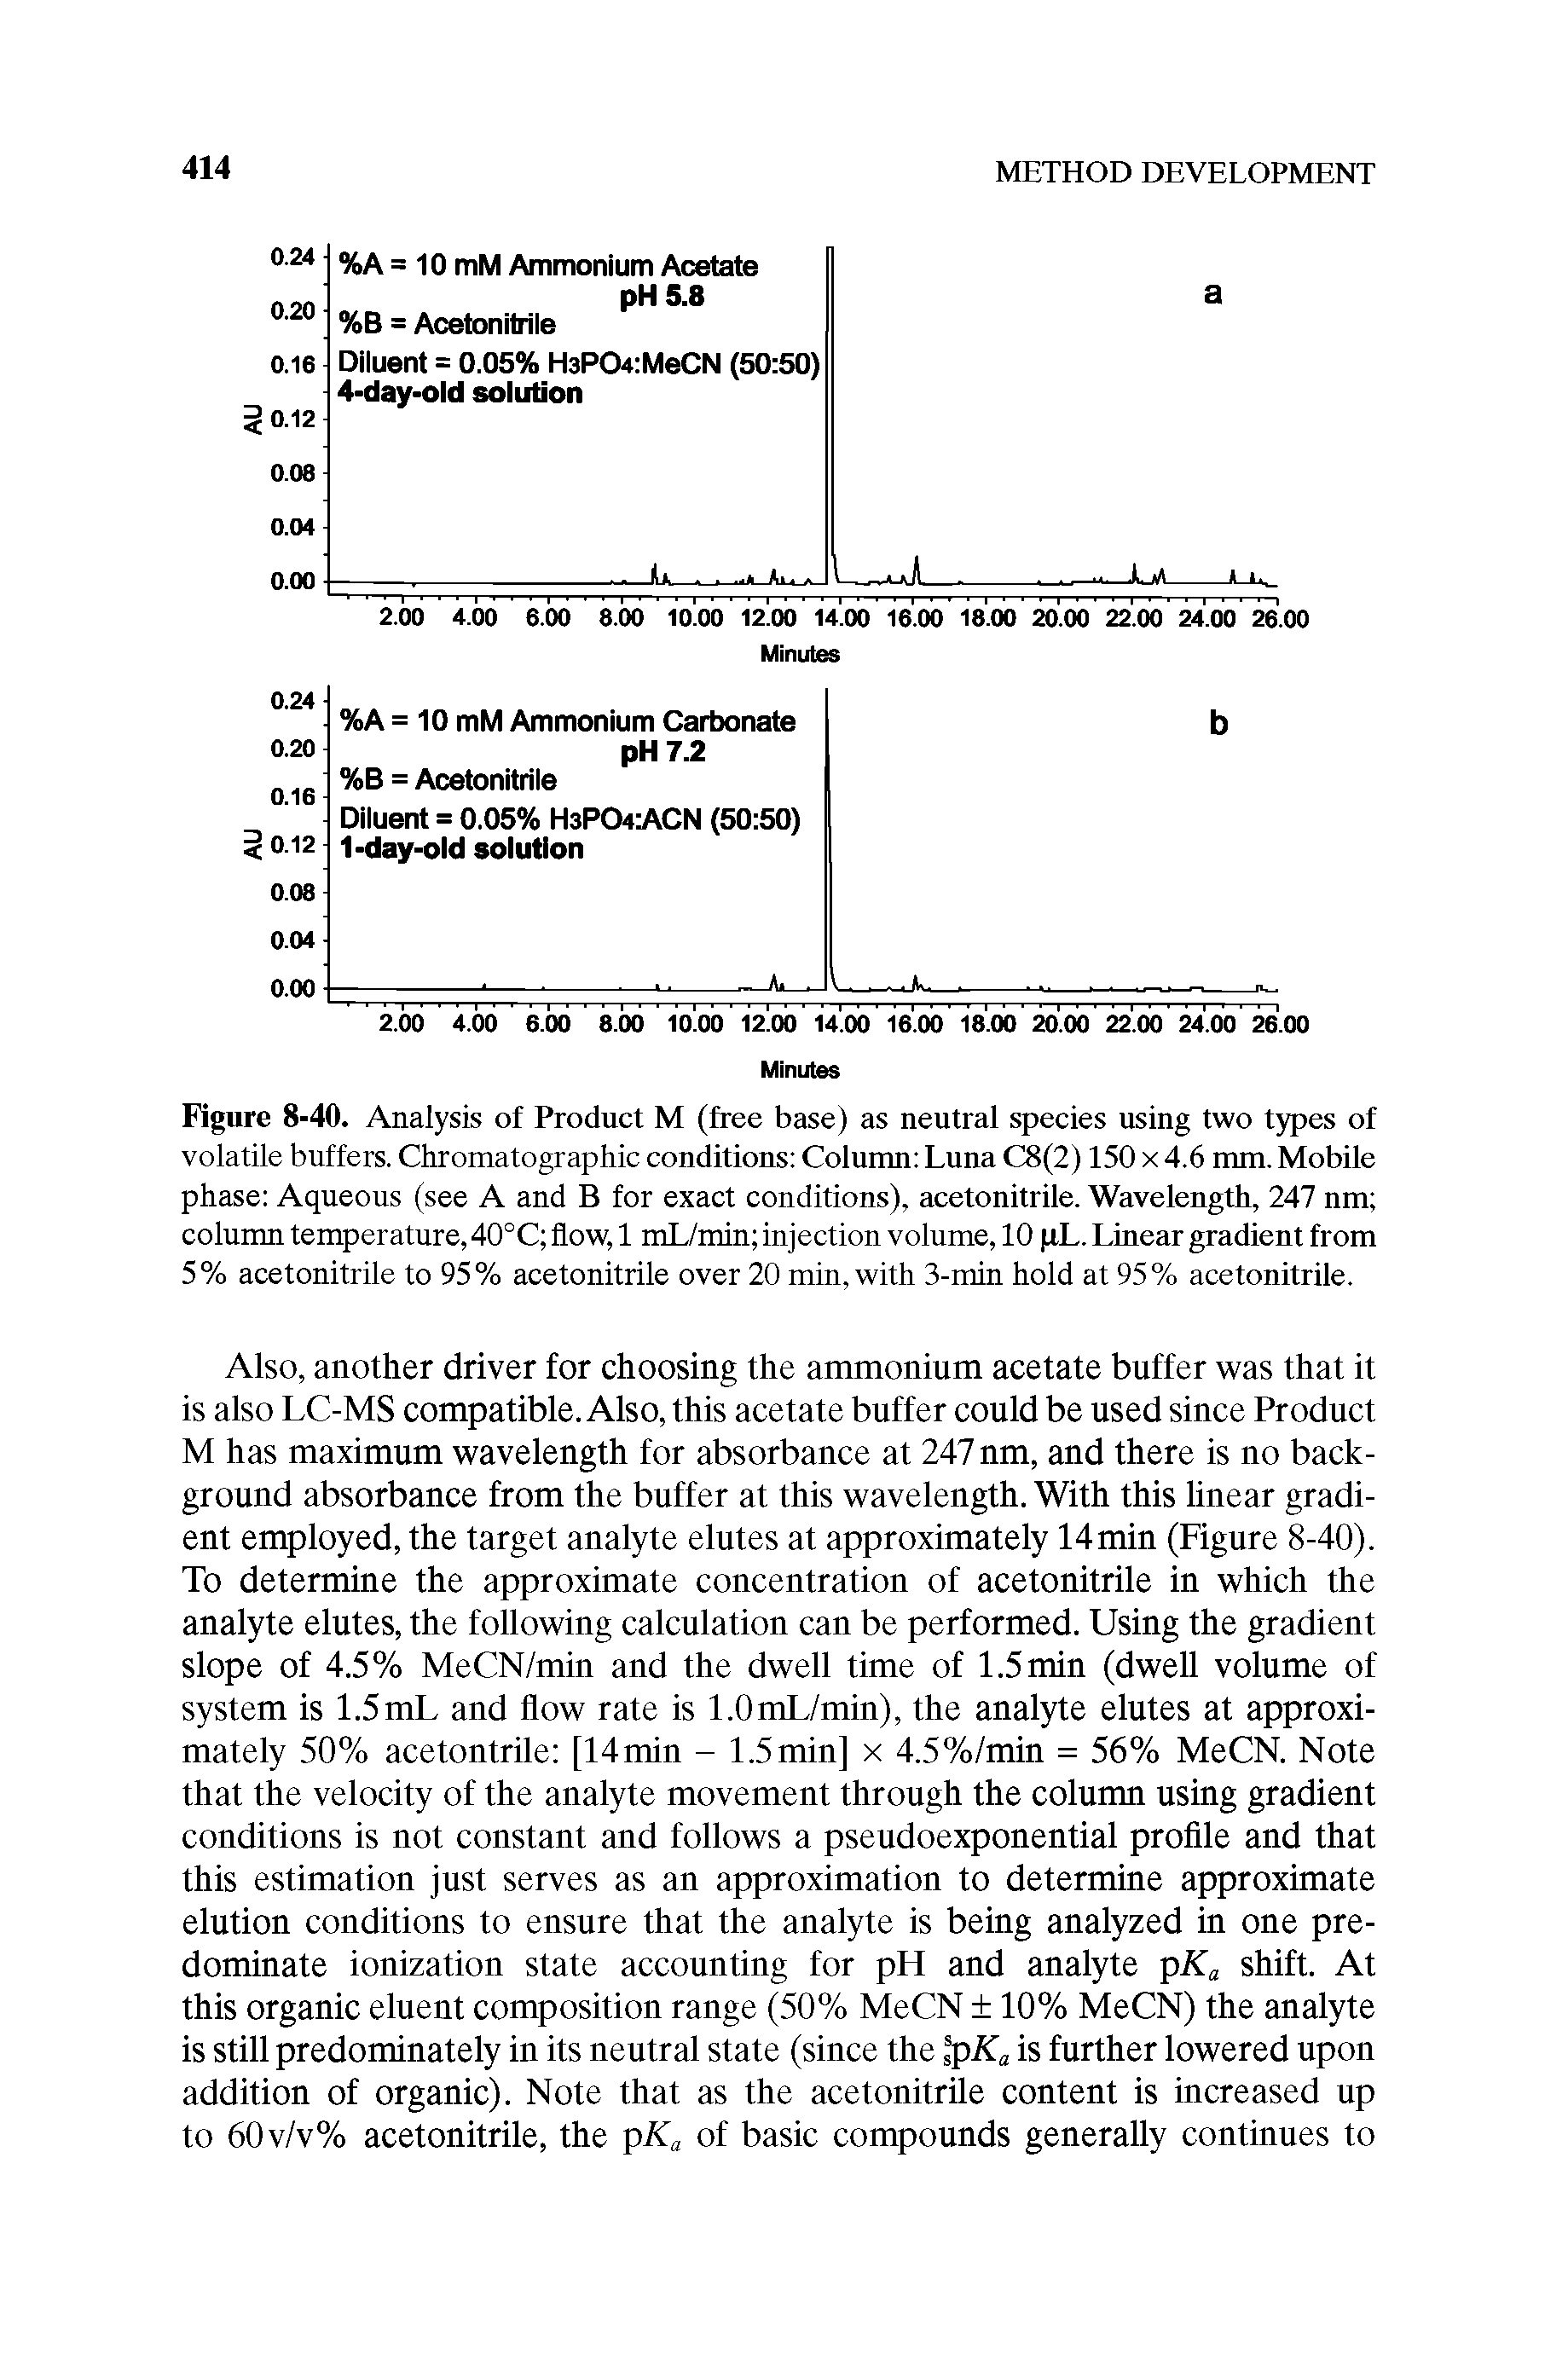 Figure 8-40. Analysis of Product M (free base) as neutral species using two types of volatile buffers. Chromatographic conditions Column Luna C8(2) 150 x 4.6 mm. Mobile phase Aqueous (see A and B for exact conditions), acetonitrile. Wavelength, 247 nm column temperature, 40°C flow, 1 mL/min injection volume, 10 pL. Linear gradient from 5% acetonitrile to 95% acetonitrile over 20 min, with 3-min hold at 95% acetonitrile.